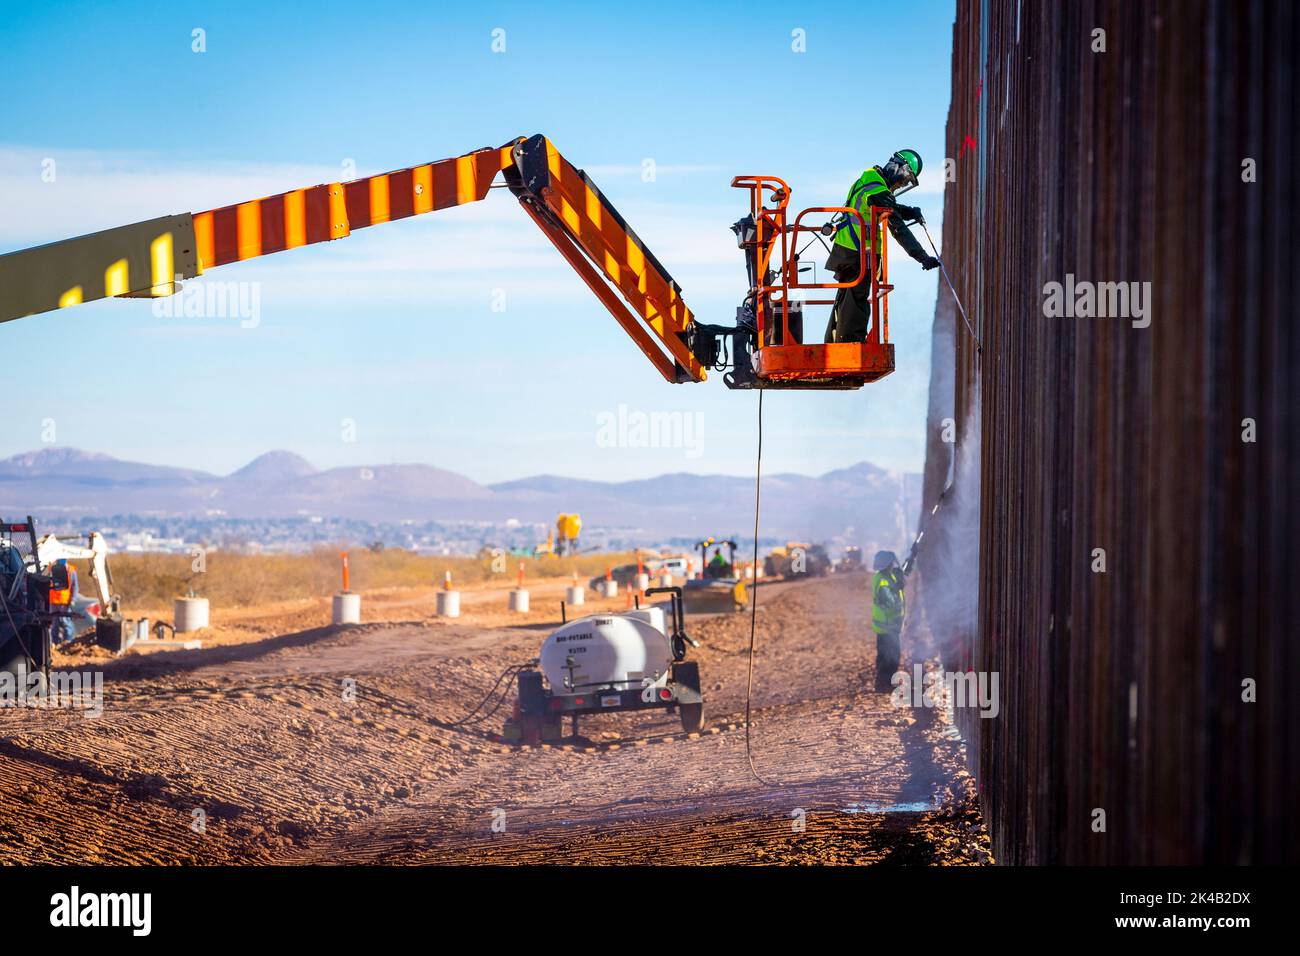 Construction continues on December 14, 2020, on a new border wall system project west of Douglas, Arizona, within U.S. Border Patrol's Tucson Sector. As of December 11, over 425 miles of new border wall system have been built along the southwest border in place of outdated designs, or in locations where no barriers previously existed.  Photo by Jerry Glaser. Stock Photo